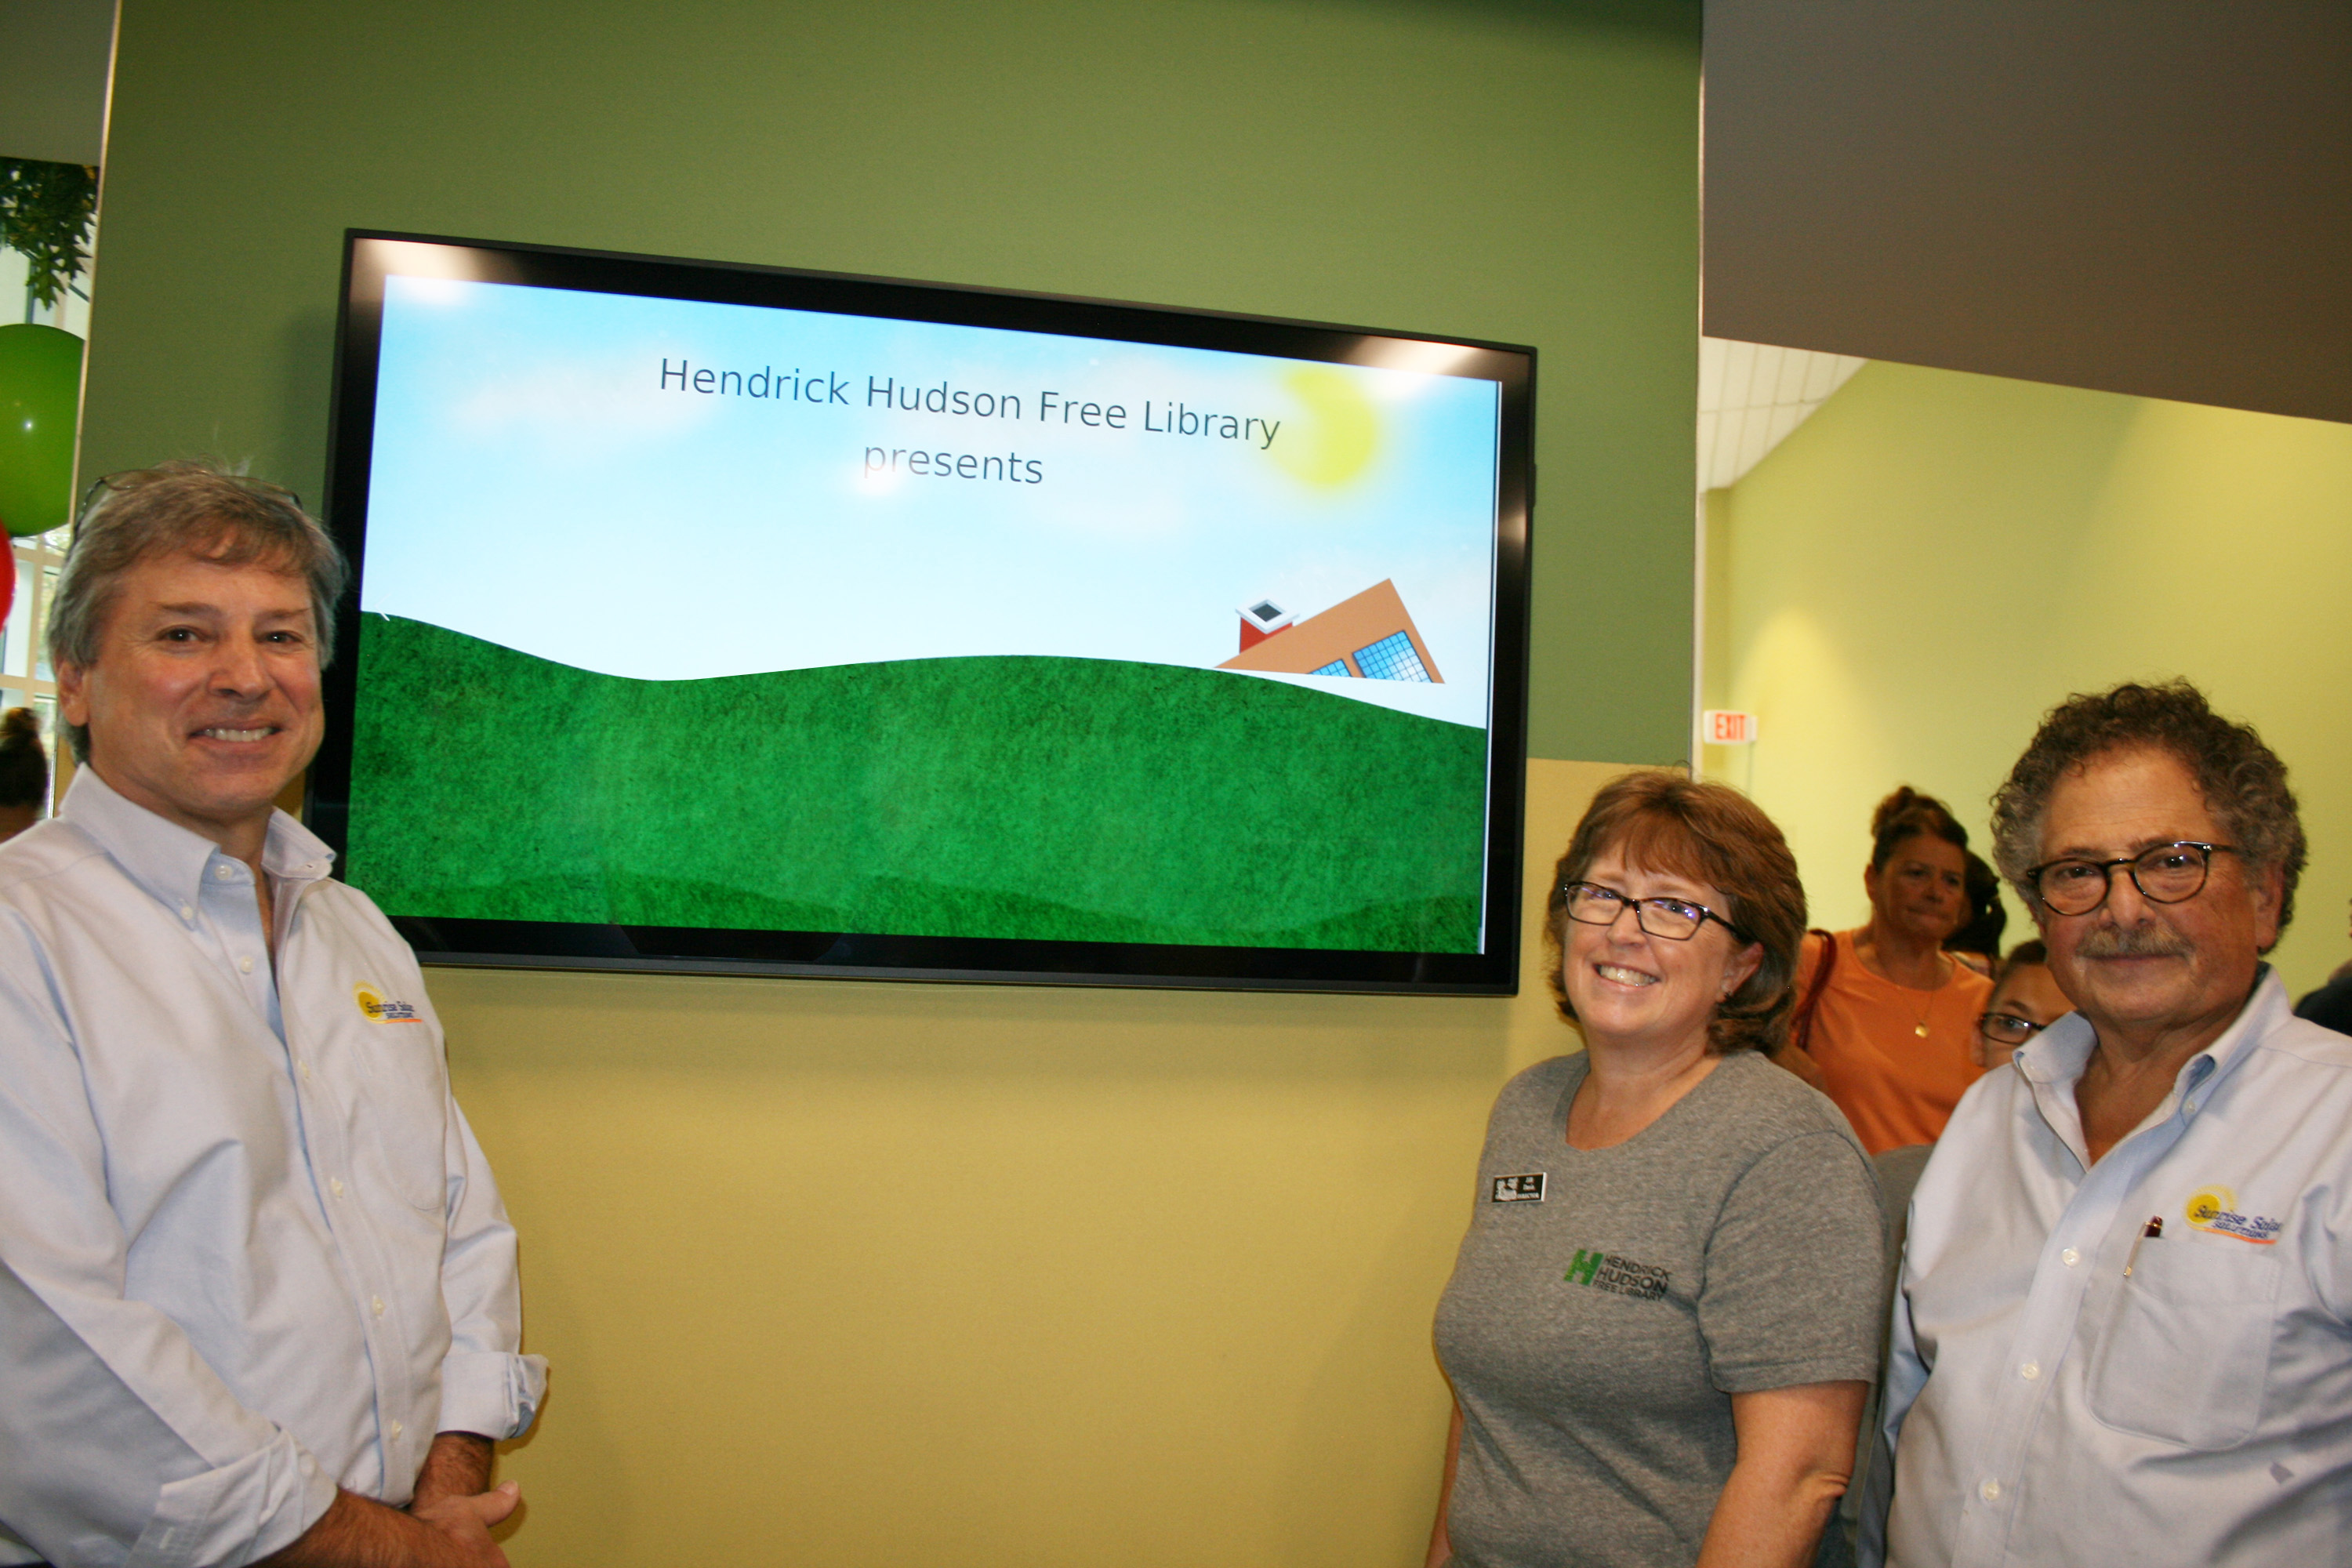 Our Ribbon-Cutting Photos for Sunrise Solar Installation at Hendrick Hudson Library